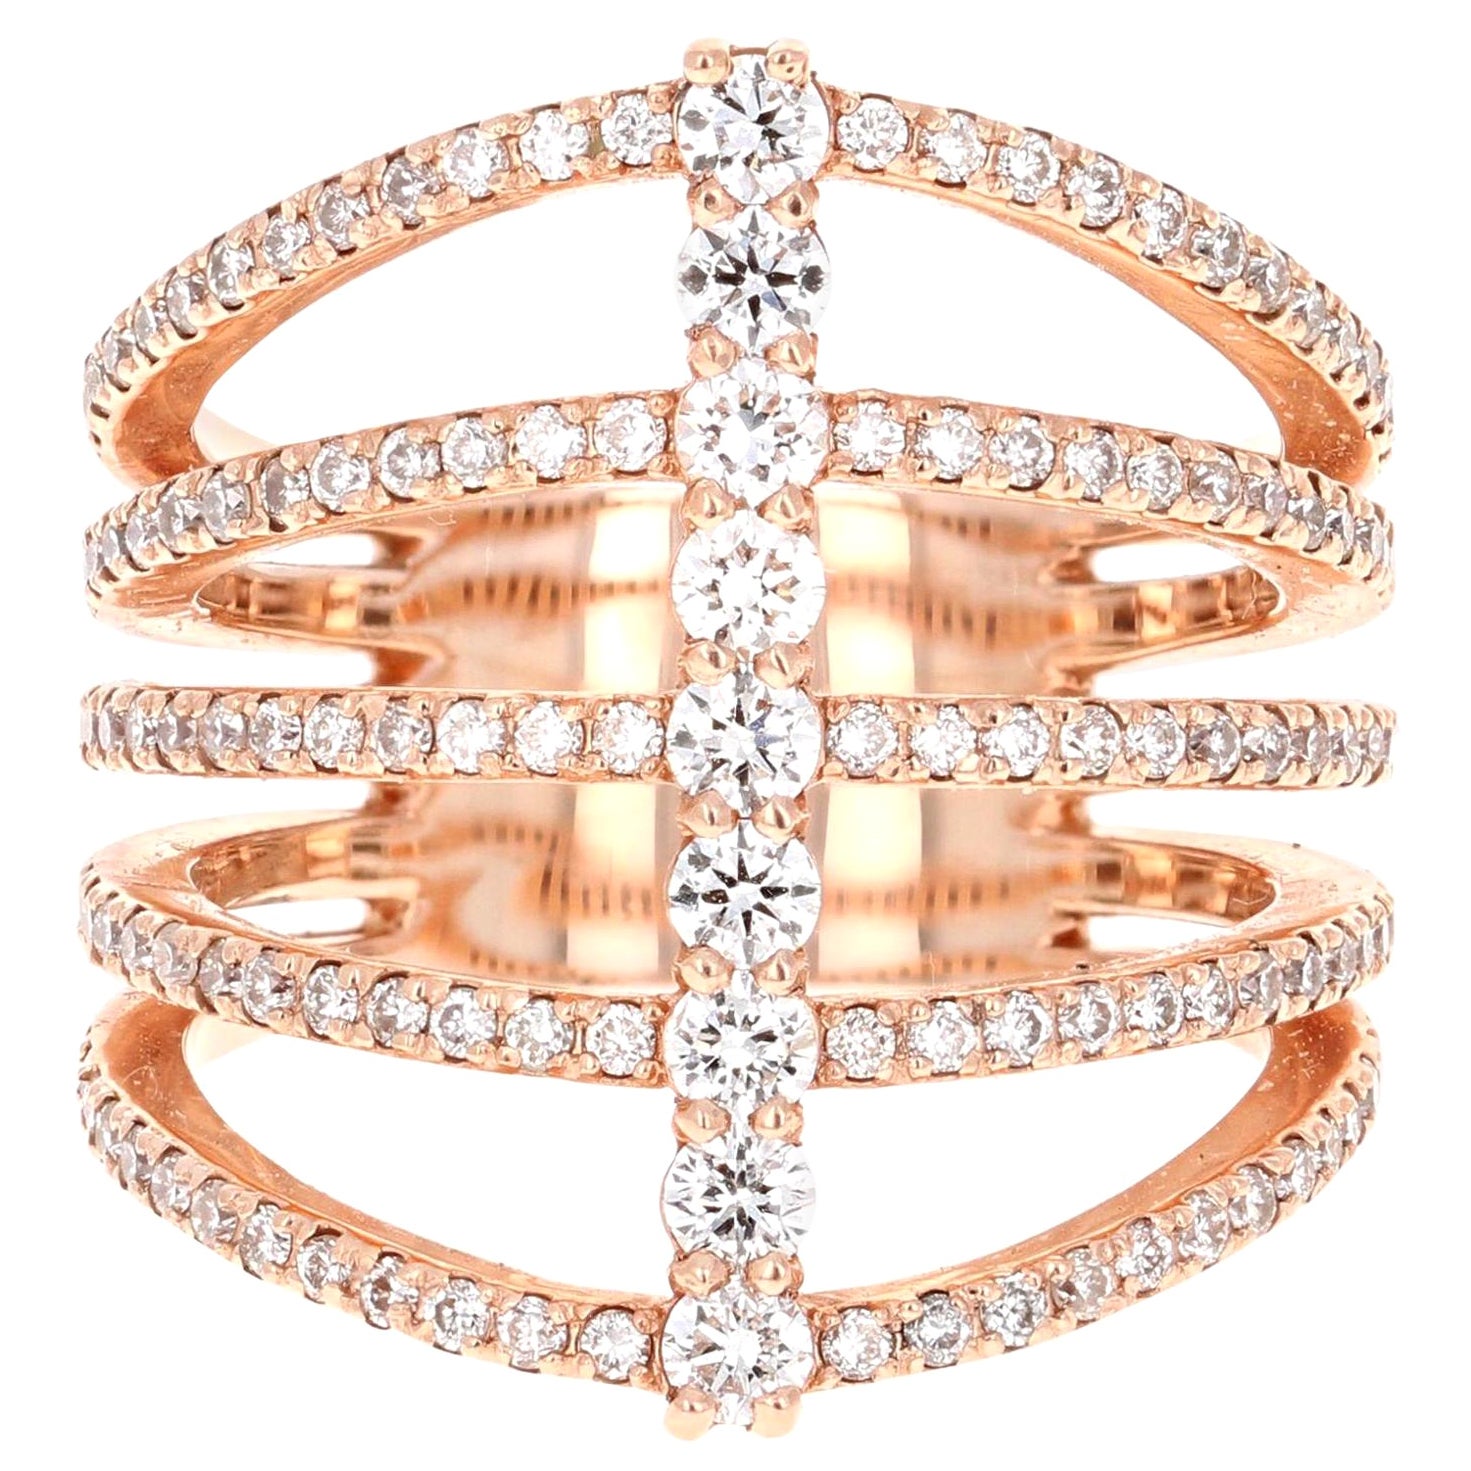 1.23 Carat Natural Diamond Rose Gold Cocktail Ring For Sale